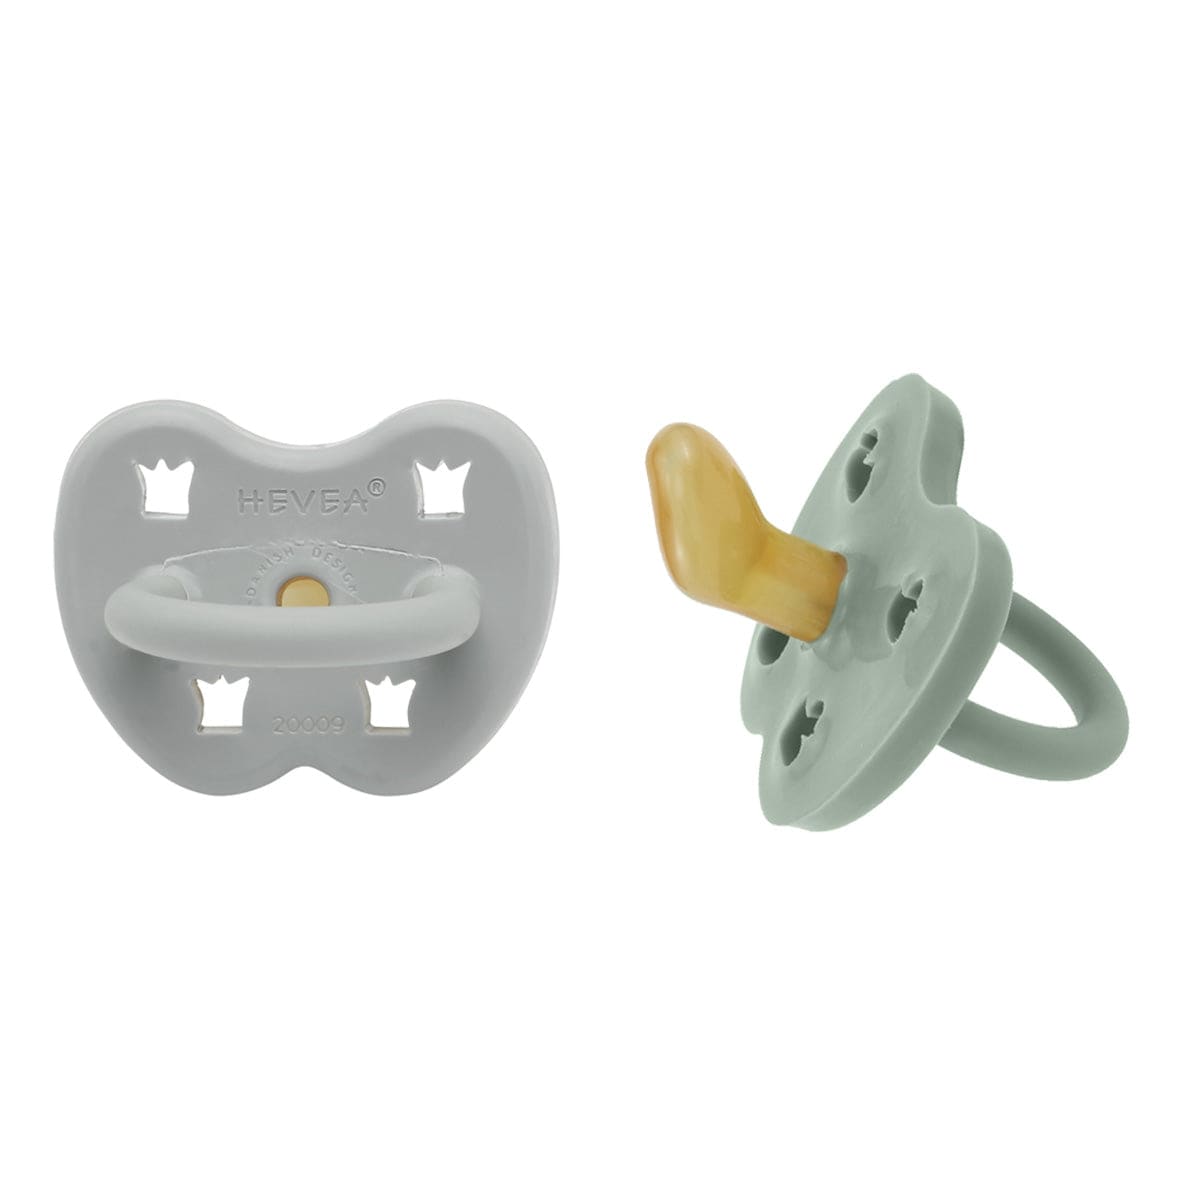 Gorgeous Grey & Sage Orthodontic Pacifier 2 Pack (3-36 Months) Hevea Hevea Lil Tulips